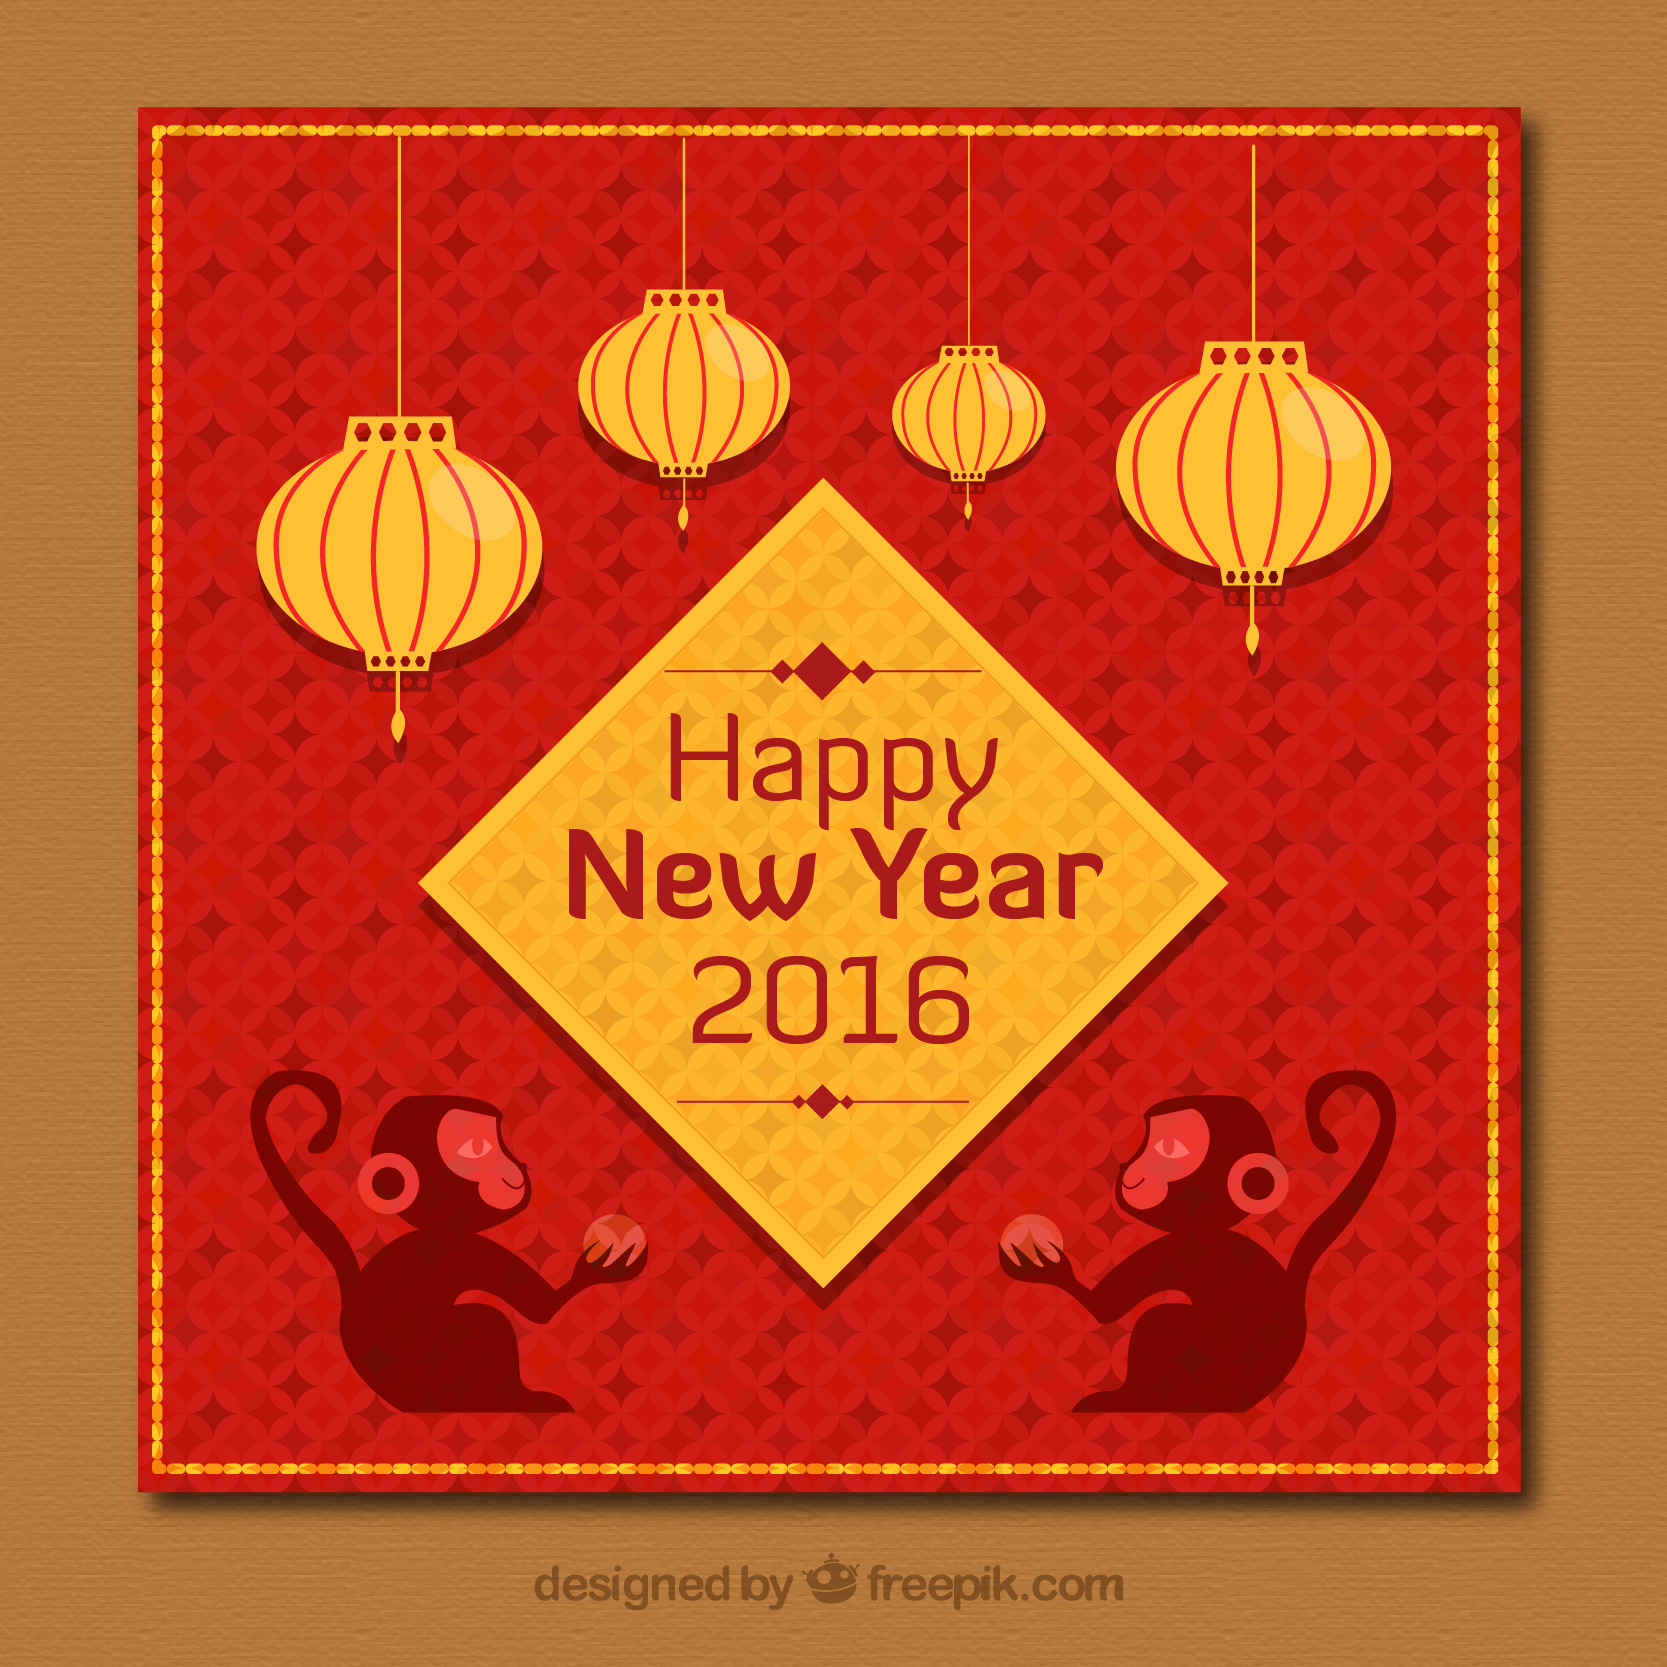 Happy New Year of the Monkey